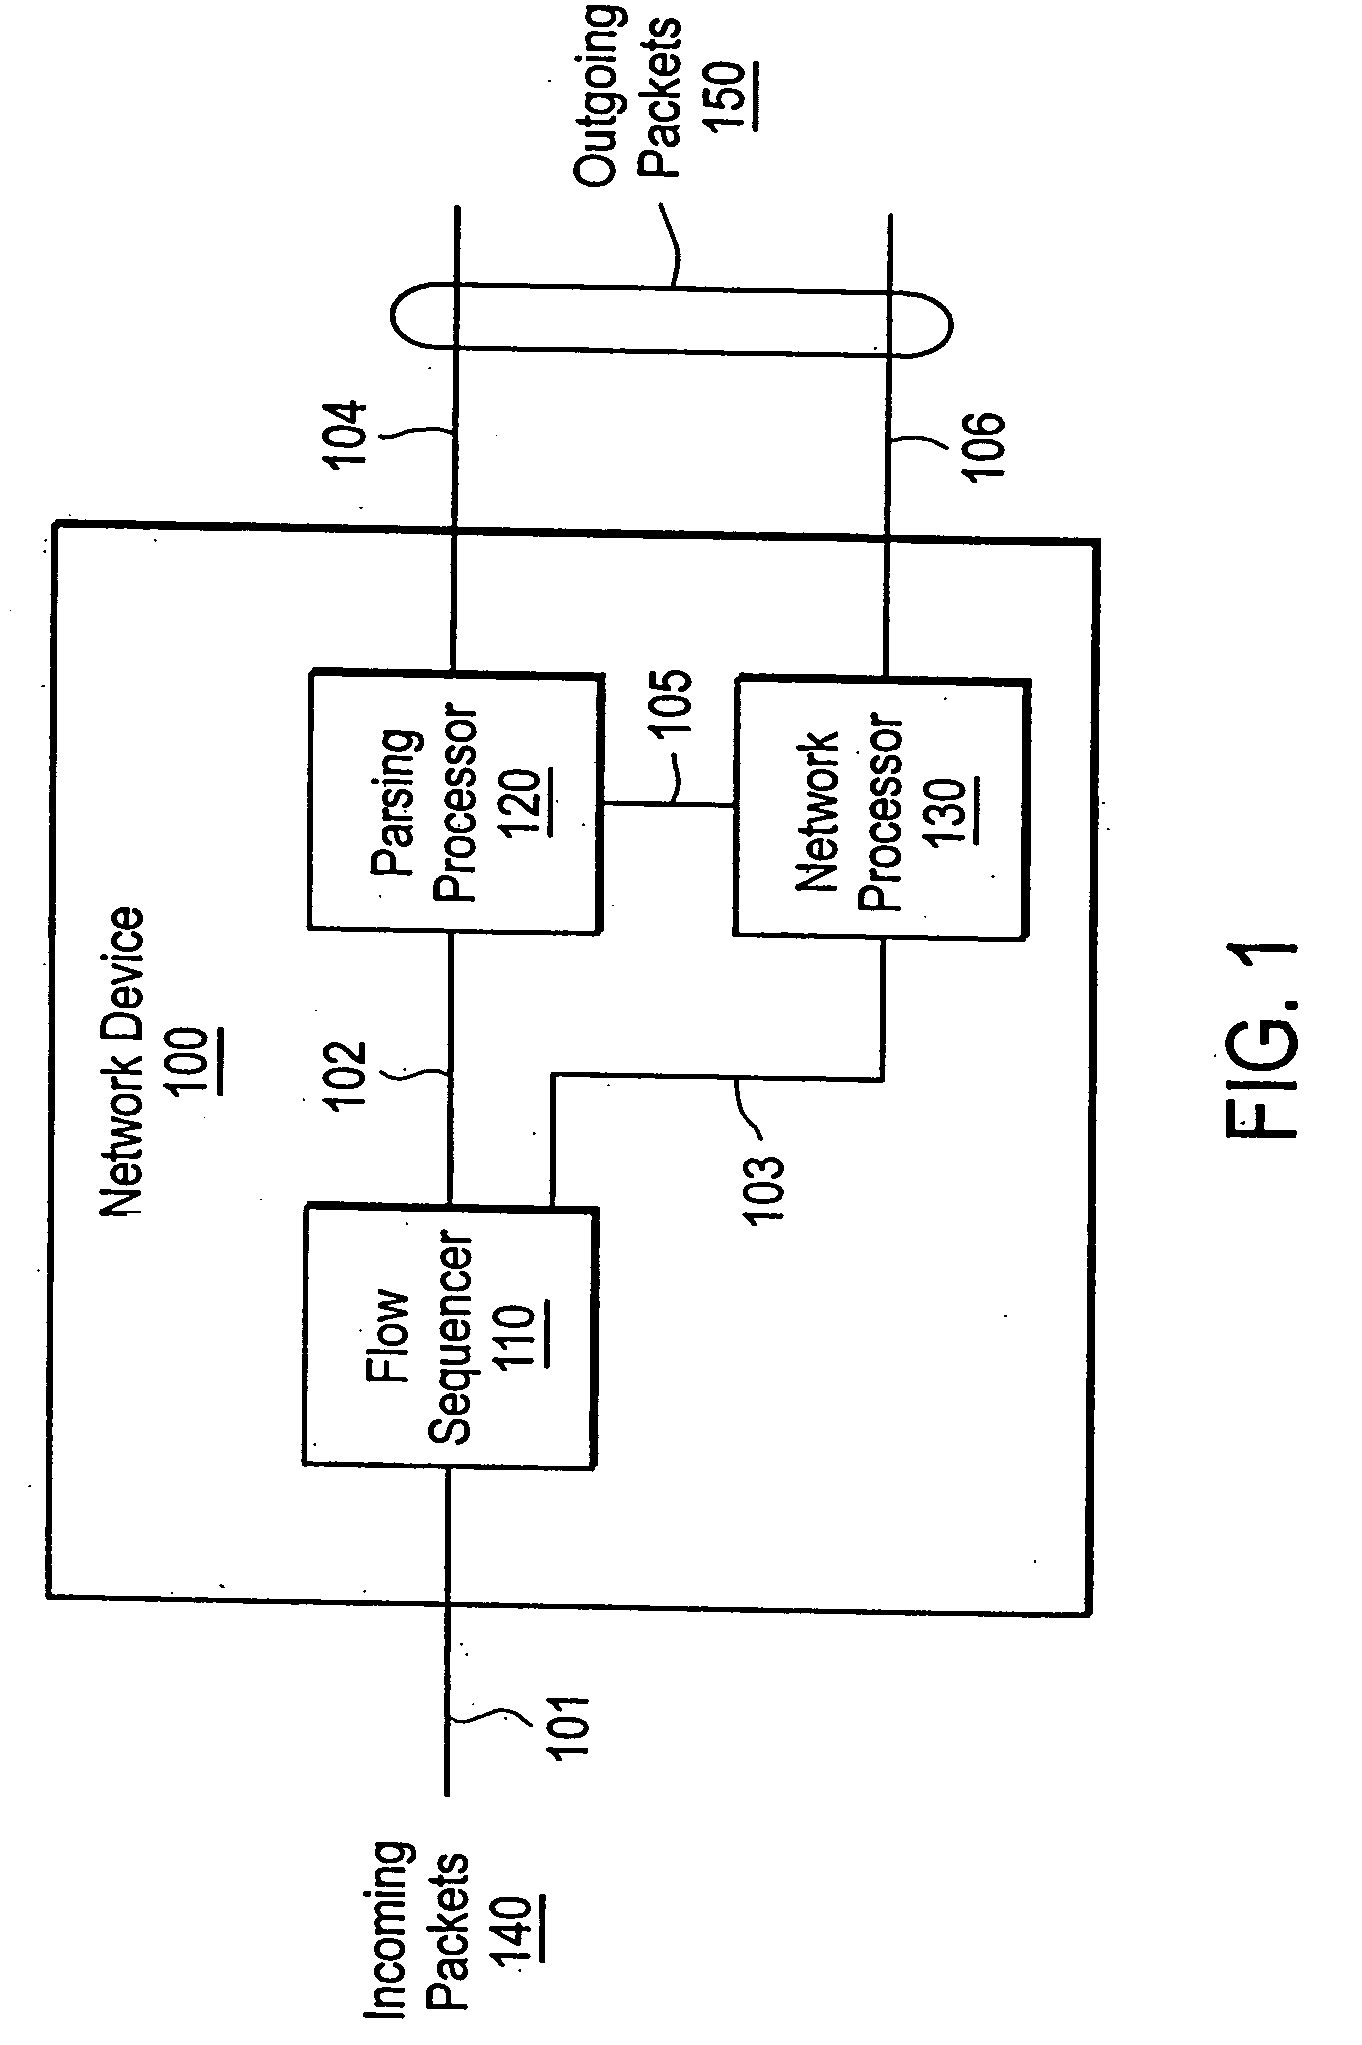 Stateful flow of network packets within a packet parsing processor